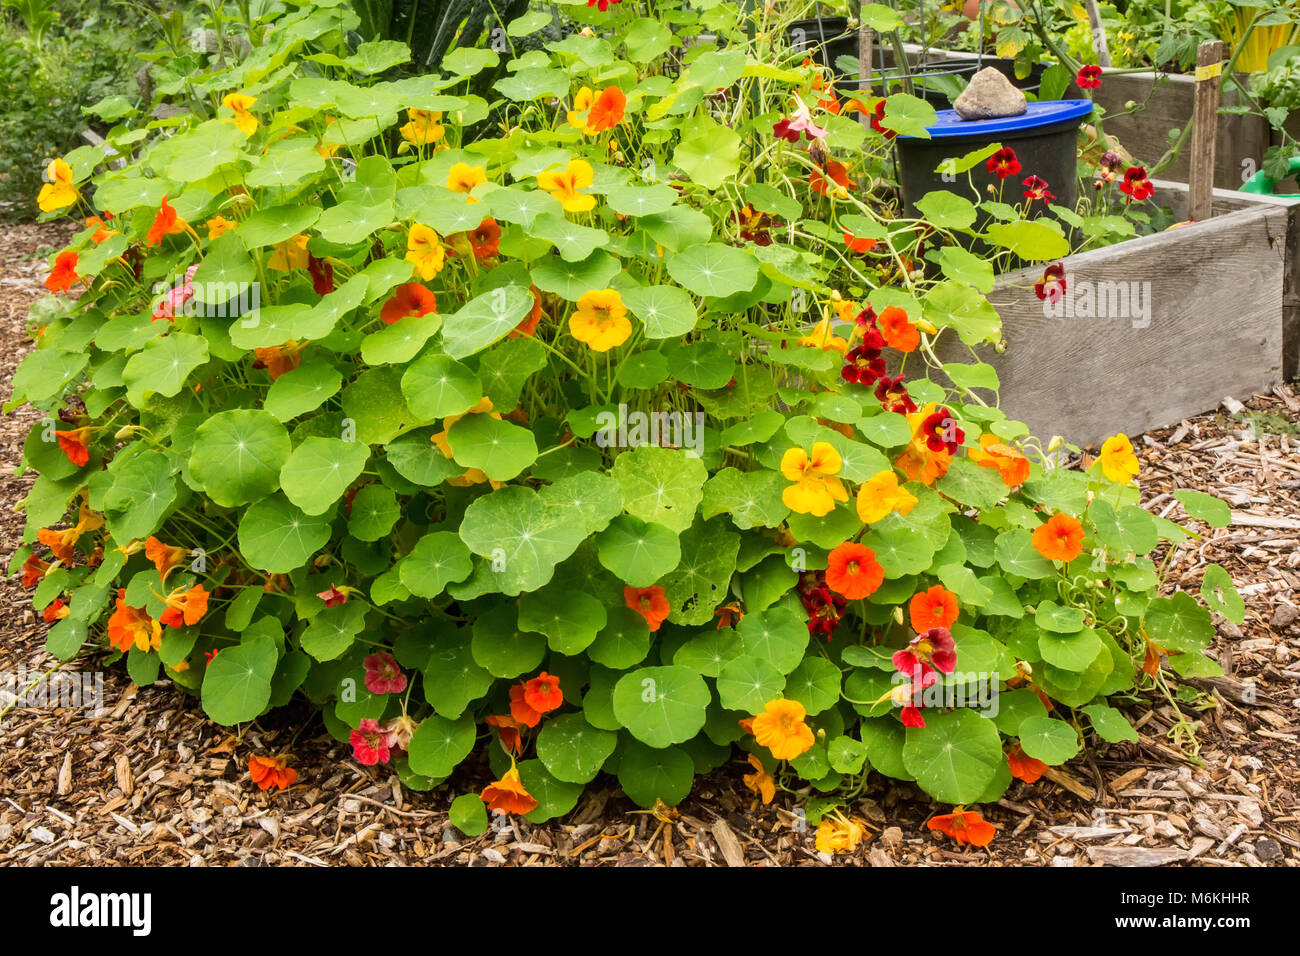 Nasturtiums Overflowing The Raised Vegetable Garden Bed They Were Stock Photo Alamy